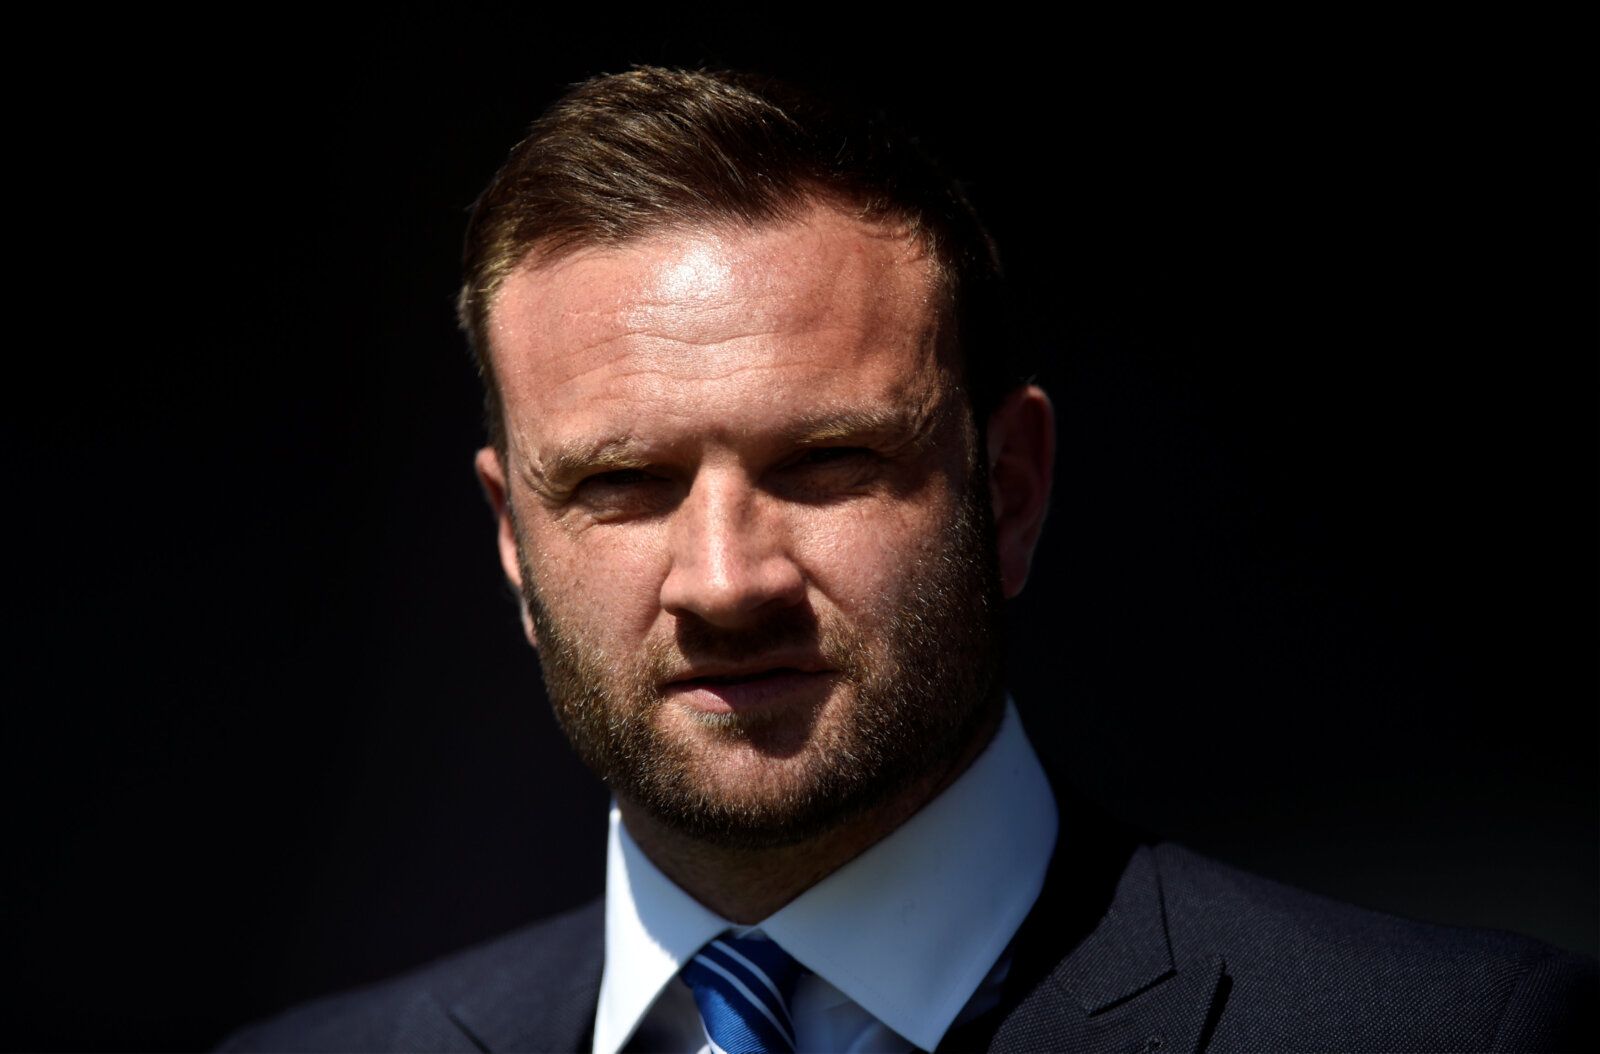 Soccer Football - League Two - Barnet vs Chesterfield - The Hive, London, Britain - May 5, 2018  Chesterfield manager Ian Evatt before the match   Action Images/Adam Holt  EDITORIAL USE ONLY. No use with unauthorized audio, video, data, fixture lists, club/league logos or "live" services. Online in-match use limited to 75 images, no video emulation. No use in betting, games or single club/league/player publications. Please contact your account representative for further details.